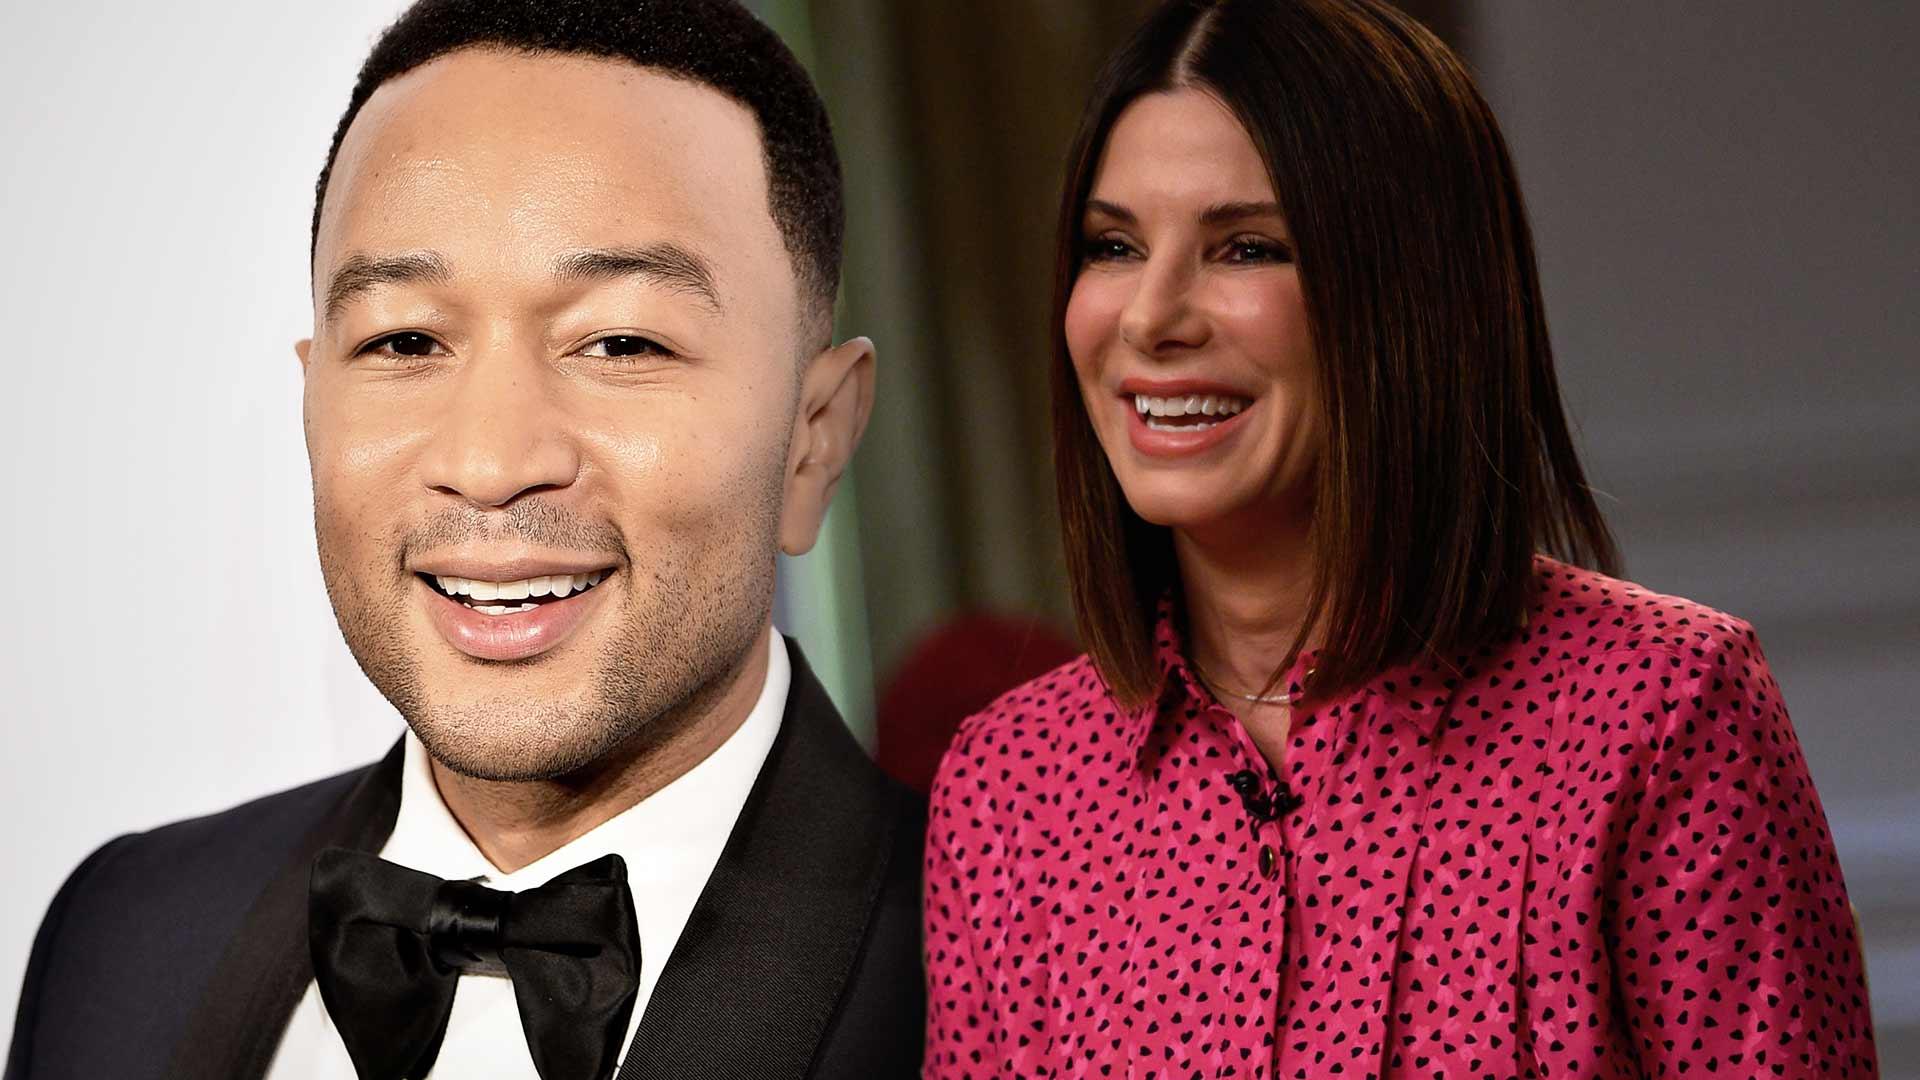 Sandra Bullock Working With John Legend to Bring Her College Life to Small Screen